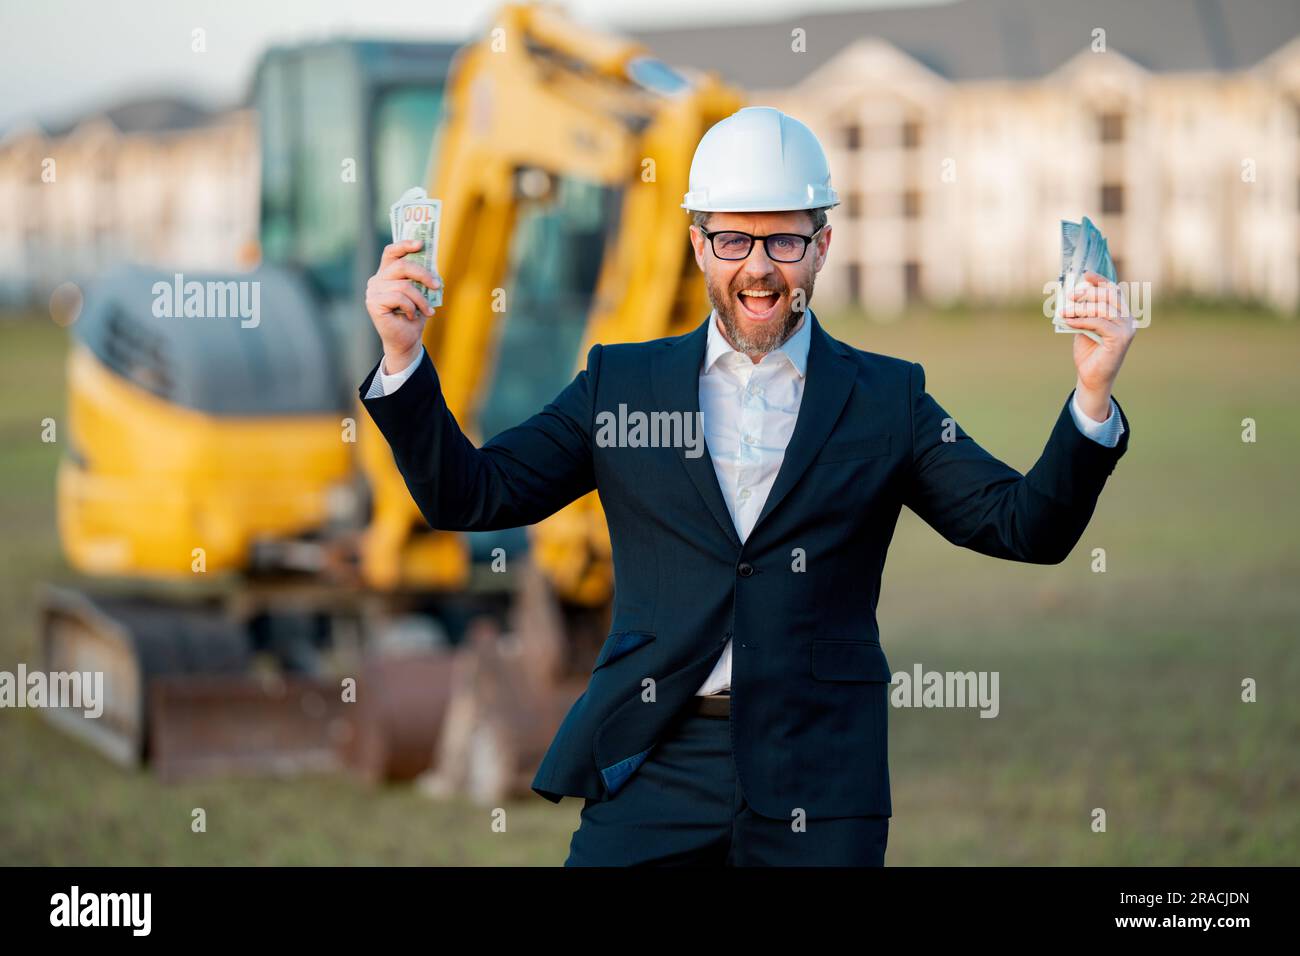 Construction manager in suit and helmet at a construction site. Construction manager worker or supervisor wearing hardhat in front of house. Superviso Stock Photo